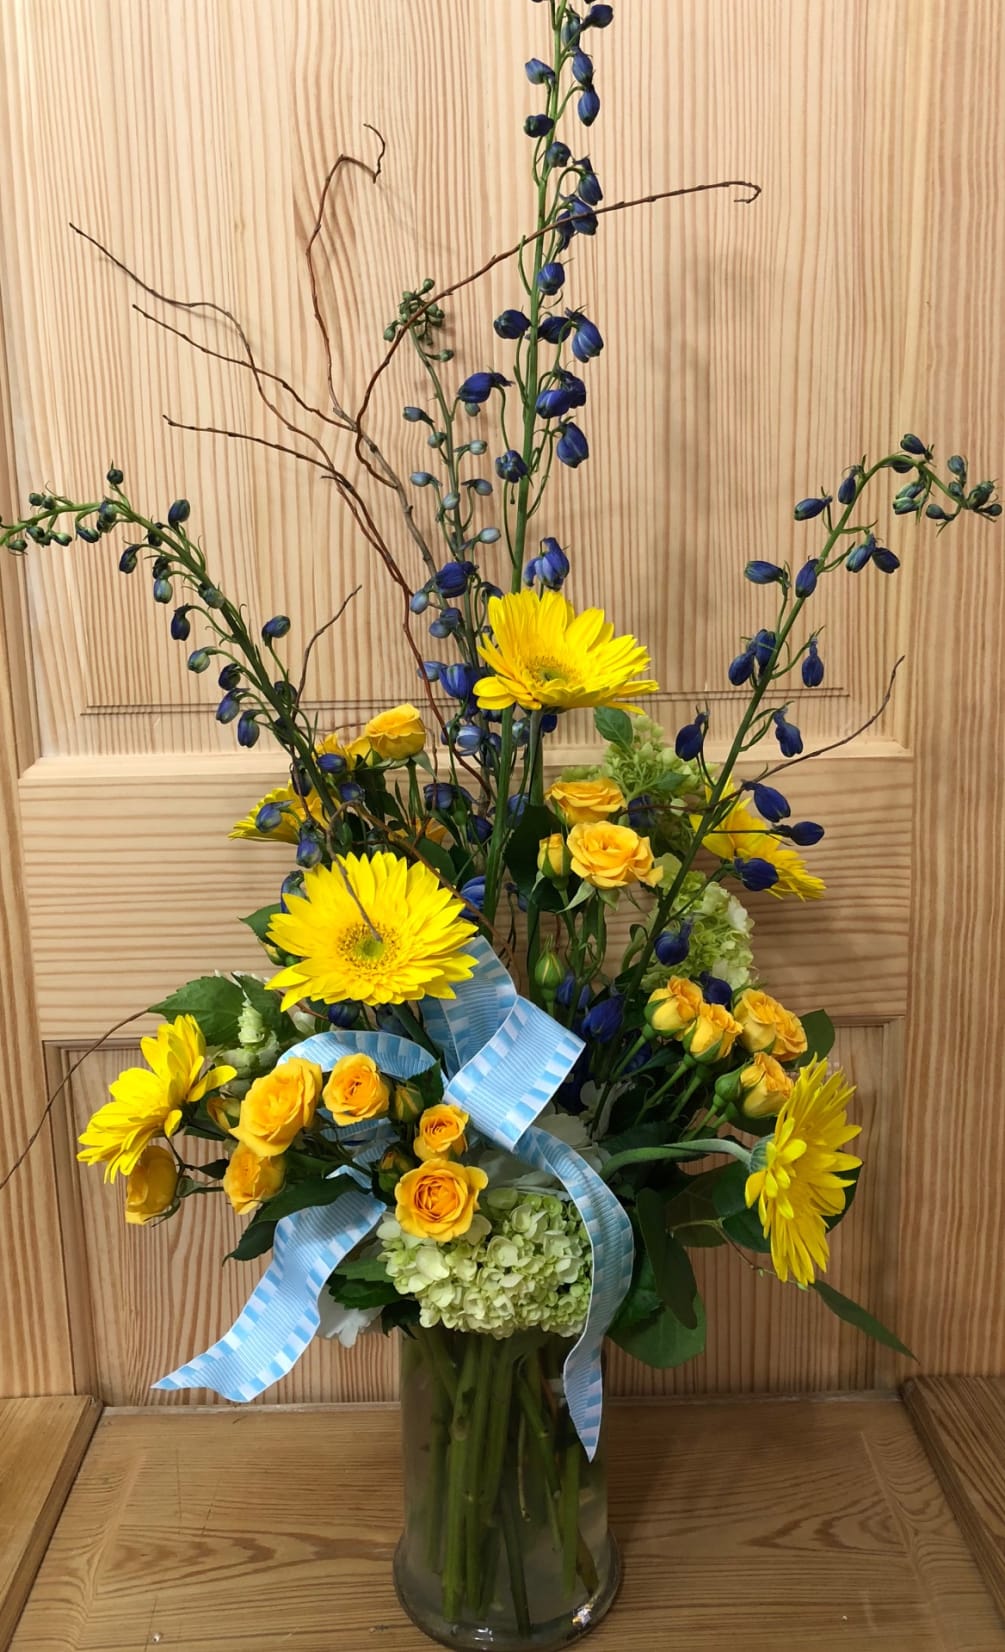 This beautiful mixed arrangement is made in blue, yellow, and white for